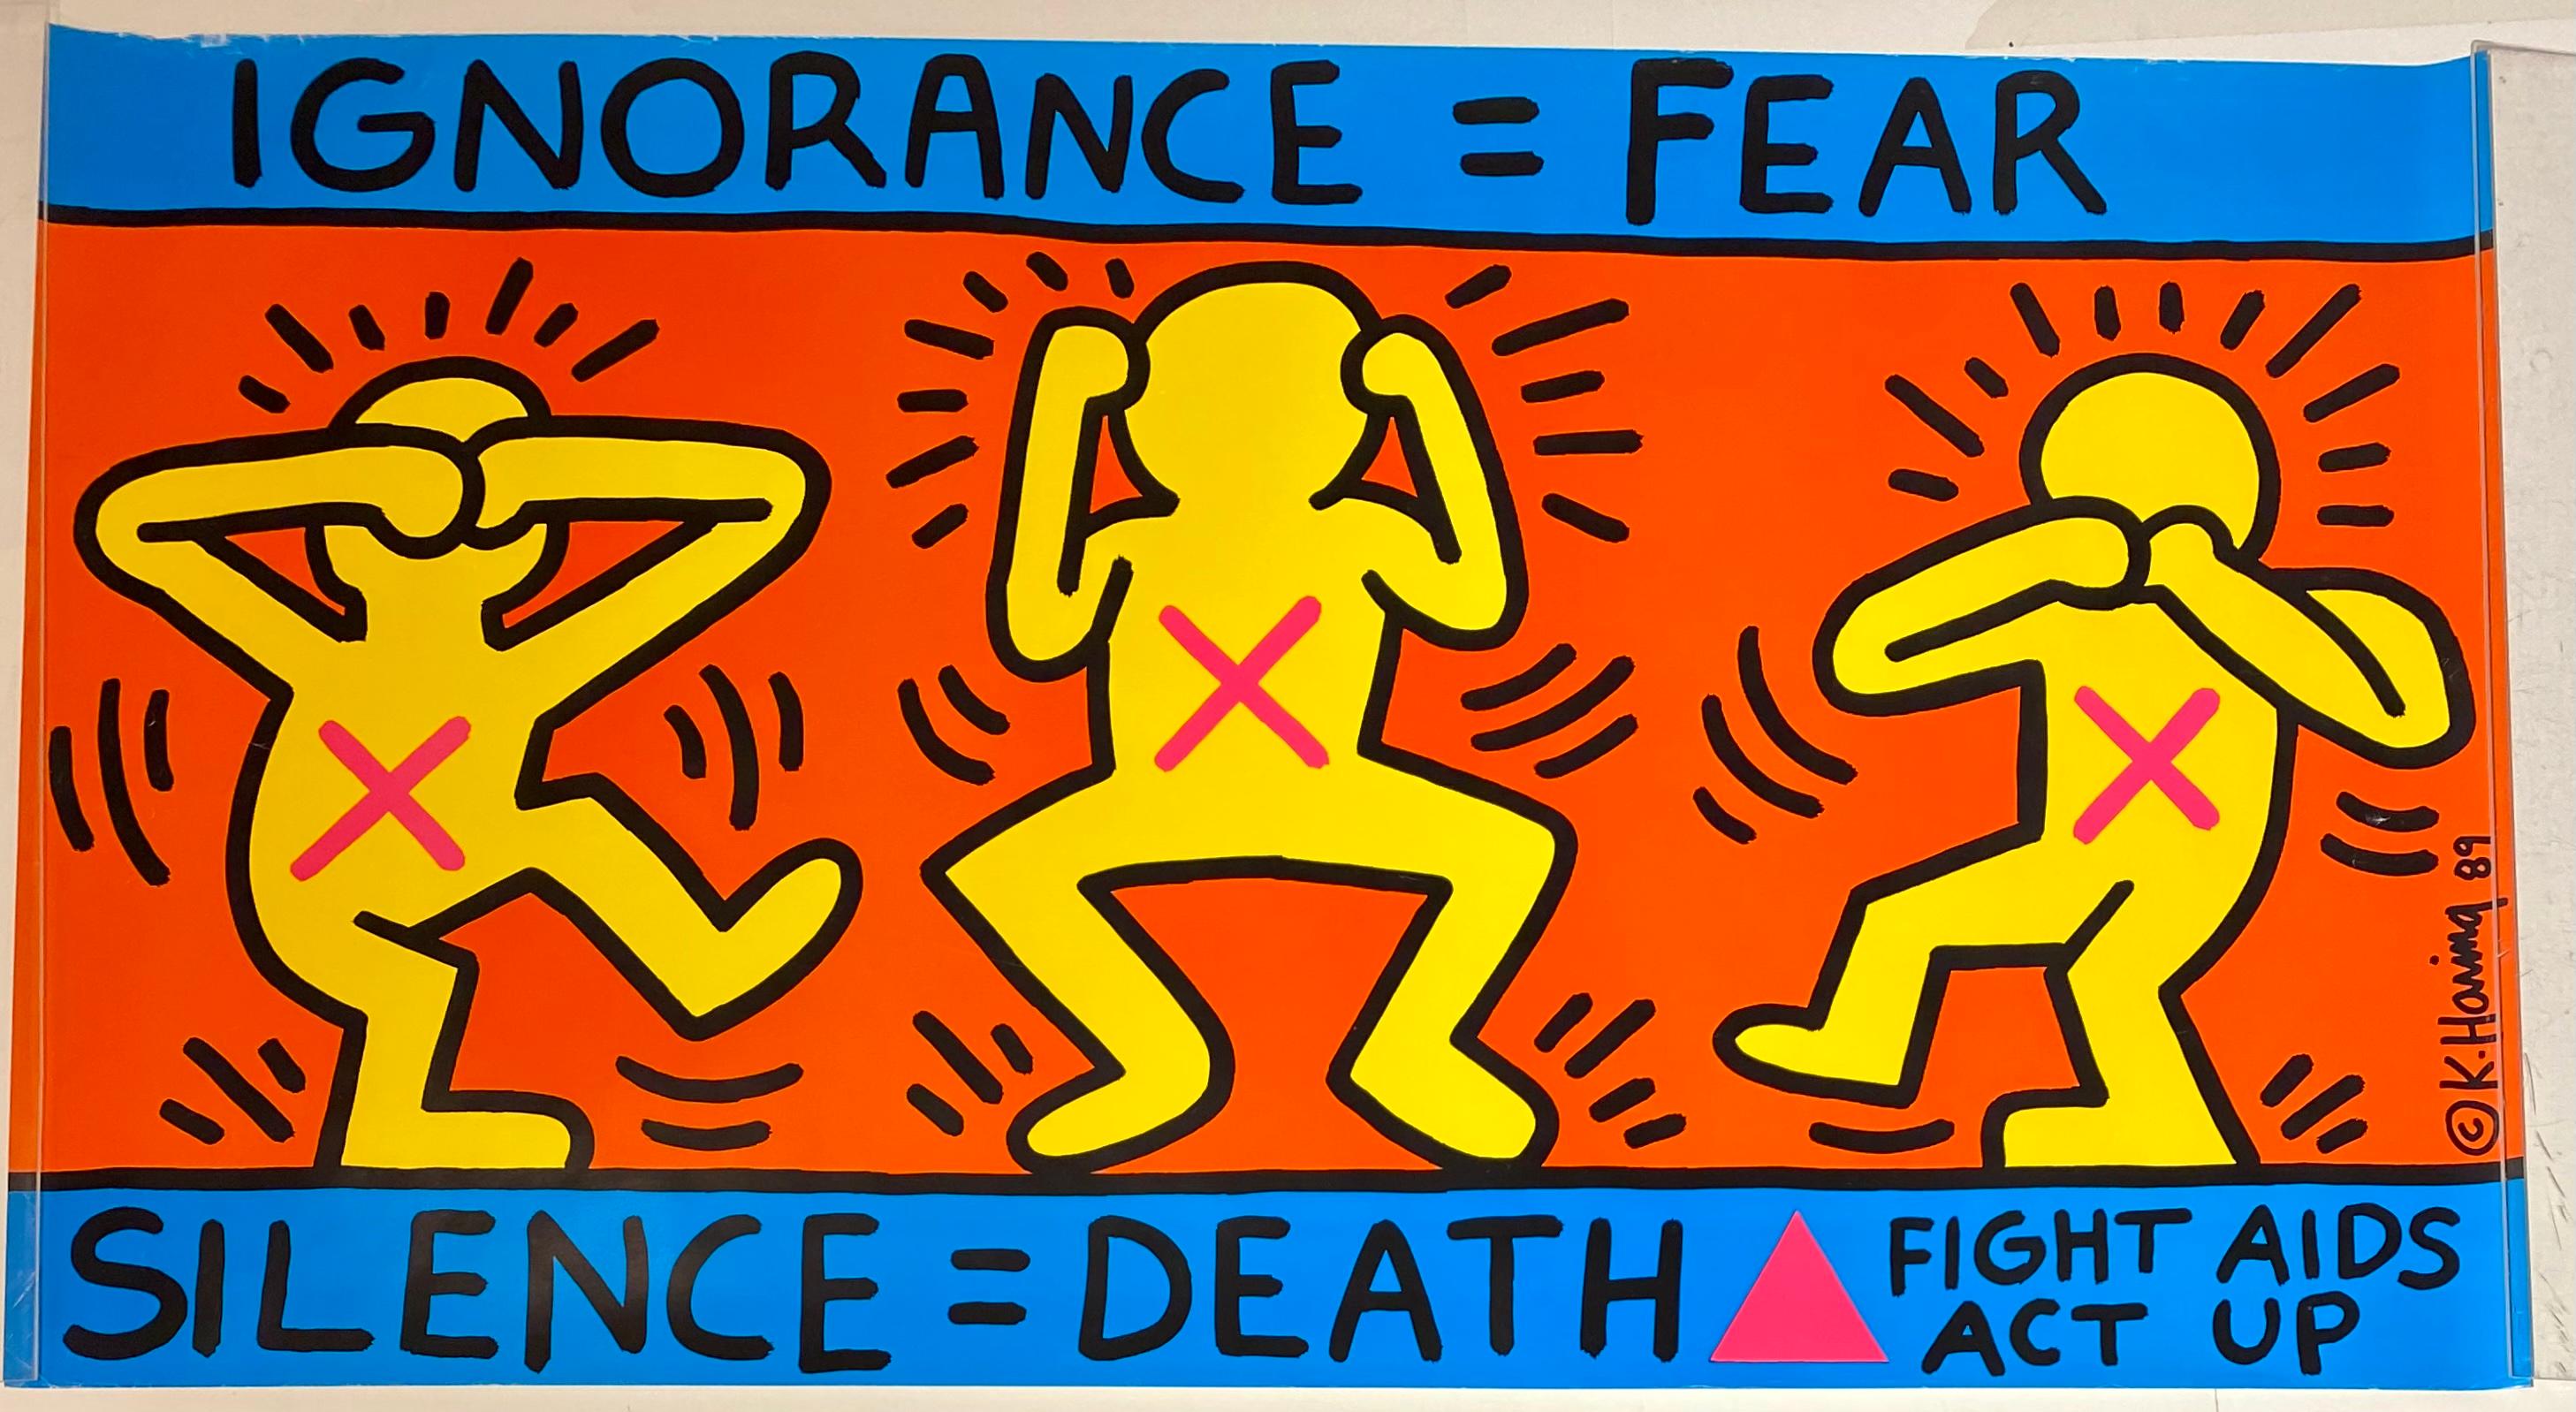 Keith Haring Ignorance = Fear, 1989 (Keith Haring Act Up poster) 7